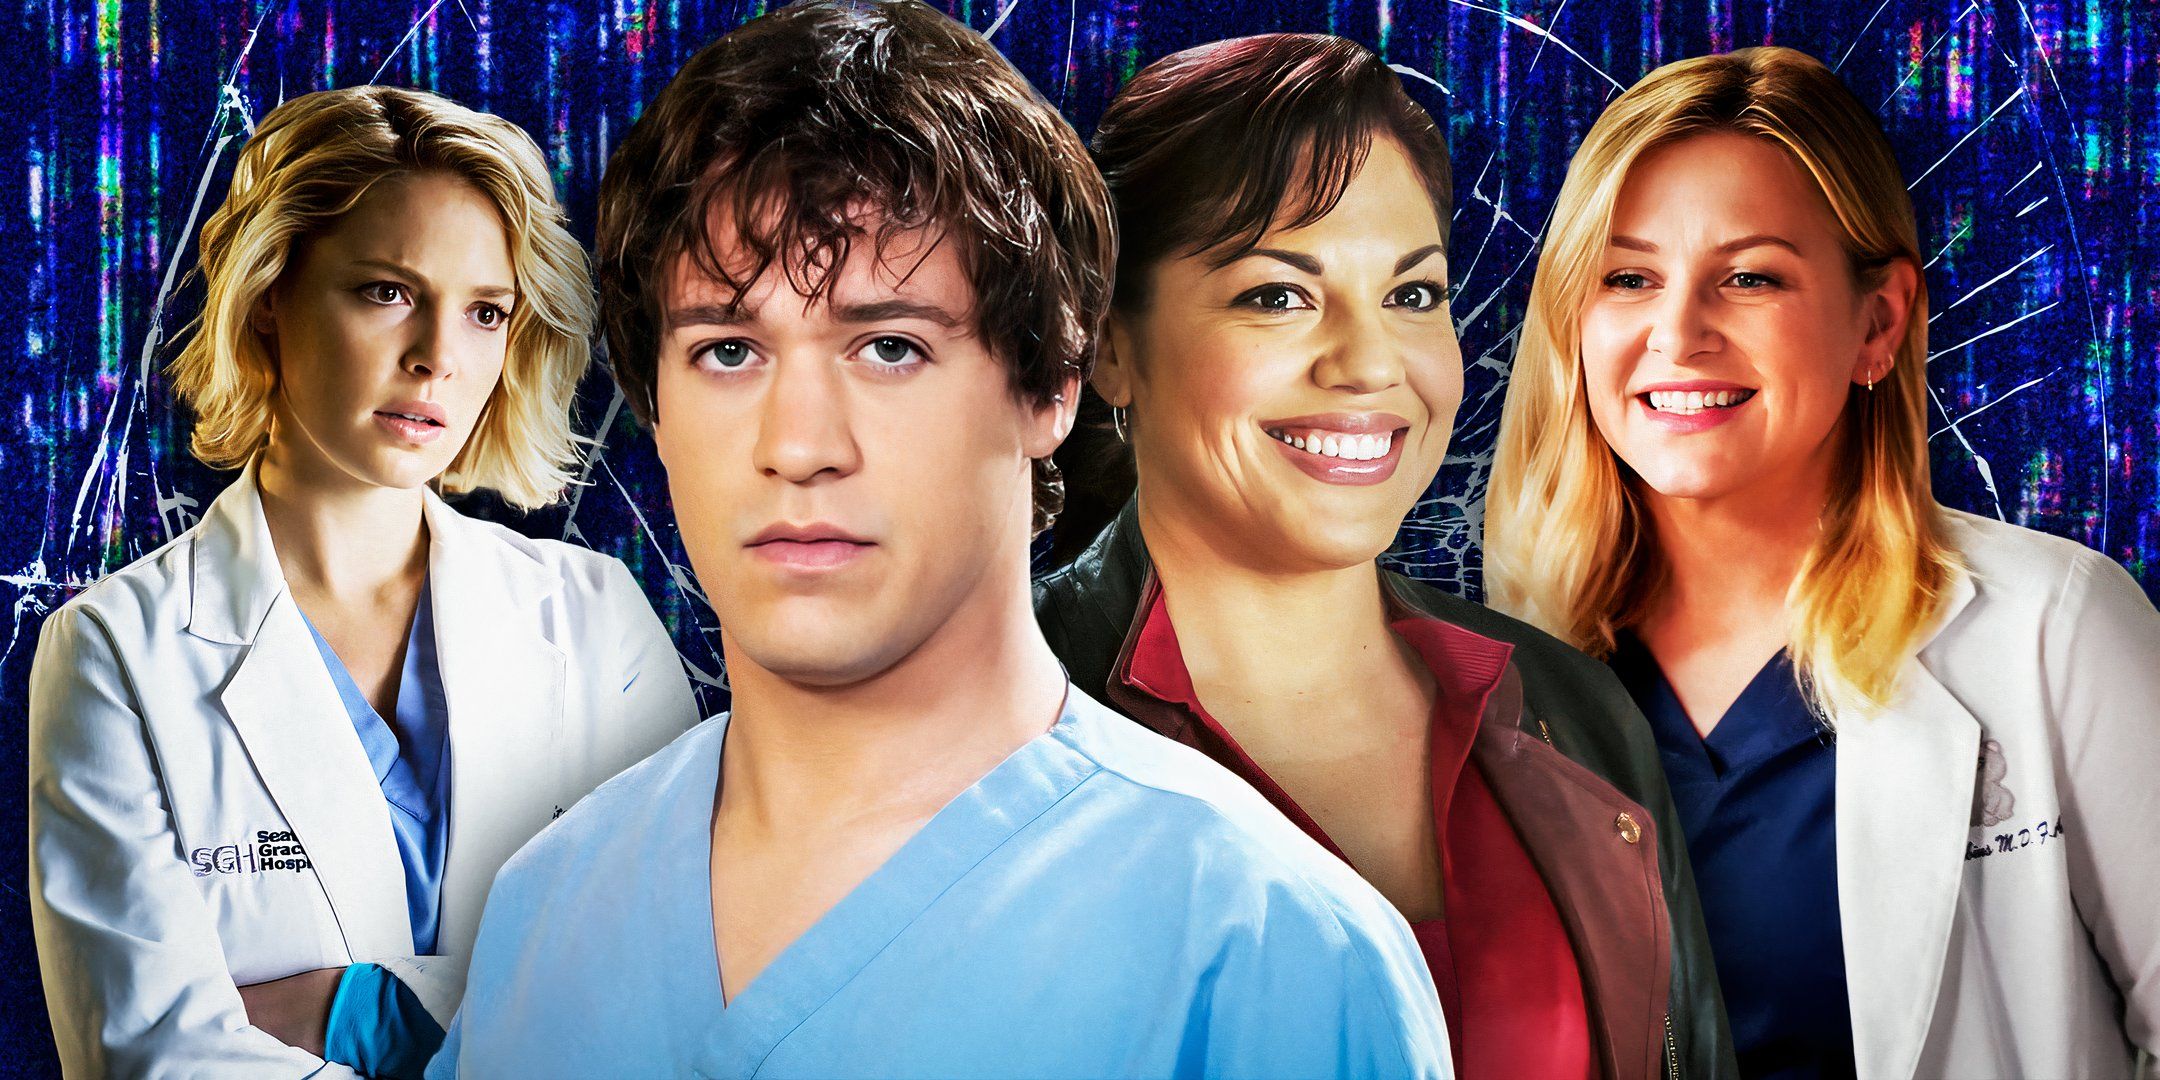 (Katherine-Heigl-as-Dr.-Izzie-Stevens),-(T.R.-Knight-as-Dr.-George-O'Malley),-(Sara-Ramirez-as-Dr.-Callie-Torres)-and-(essica-Capshaw-as-Dr